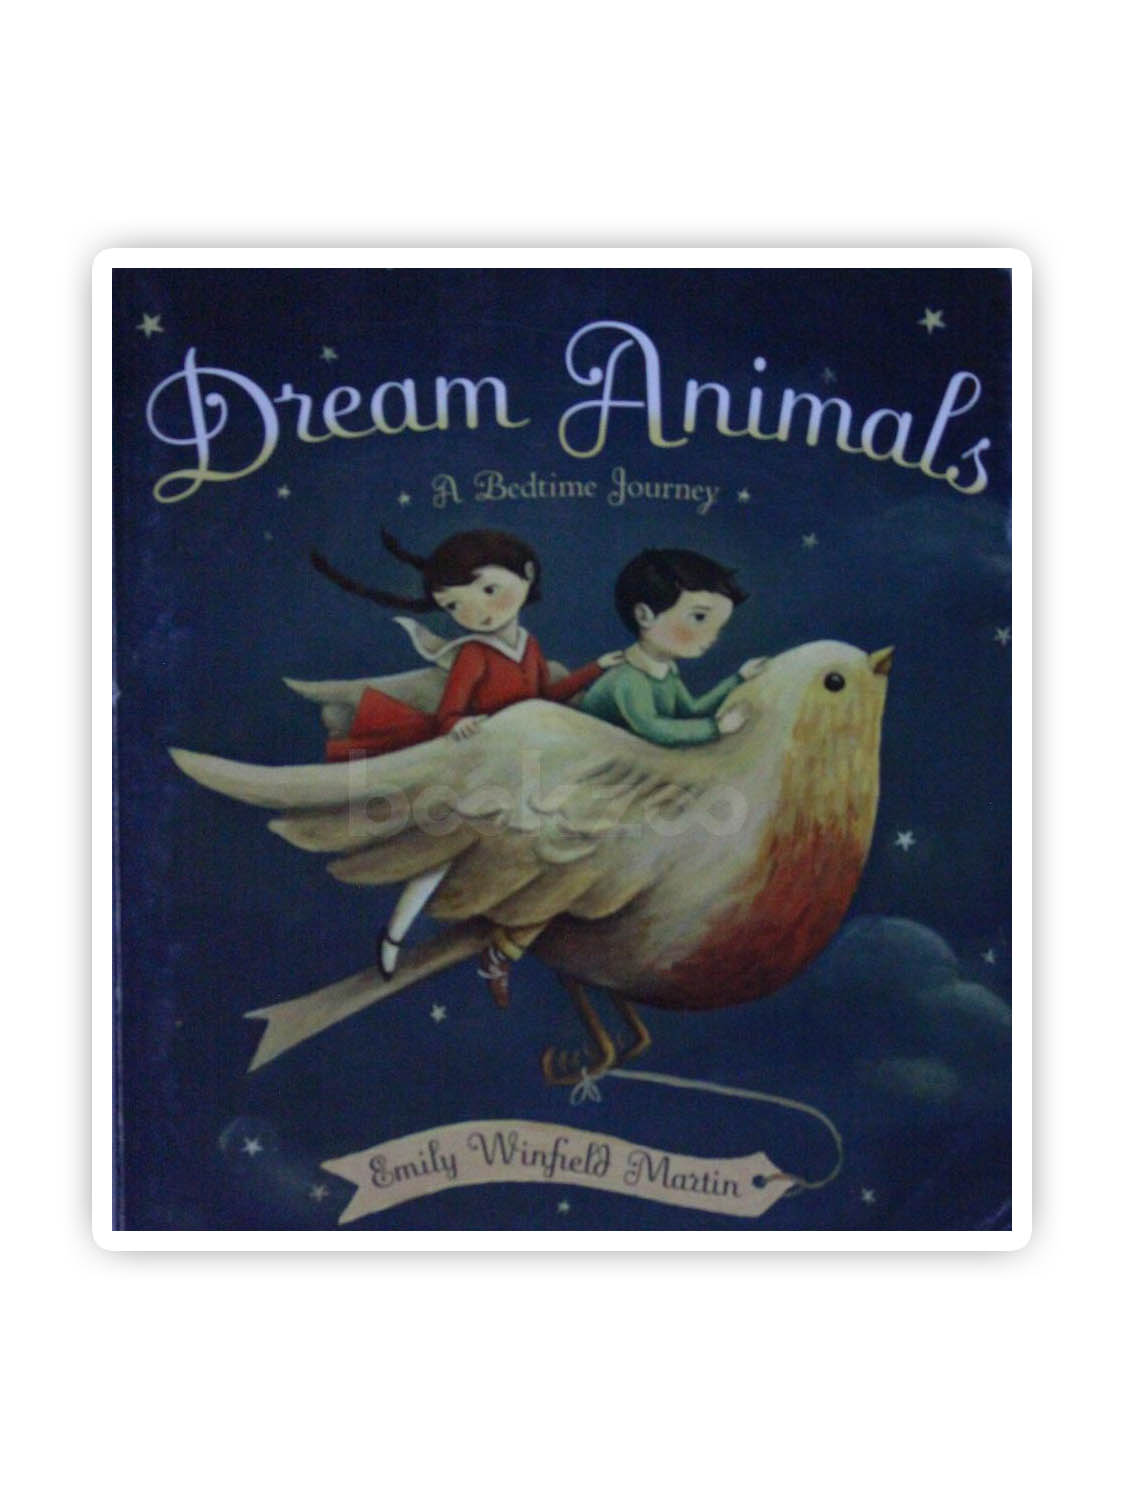 at　Winfield　Animals:　Dream　by　Martin　Bedtime　Emily　Journey　—　Online　bookstore　Buy　A